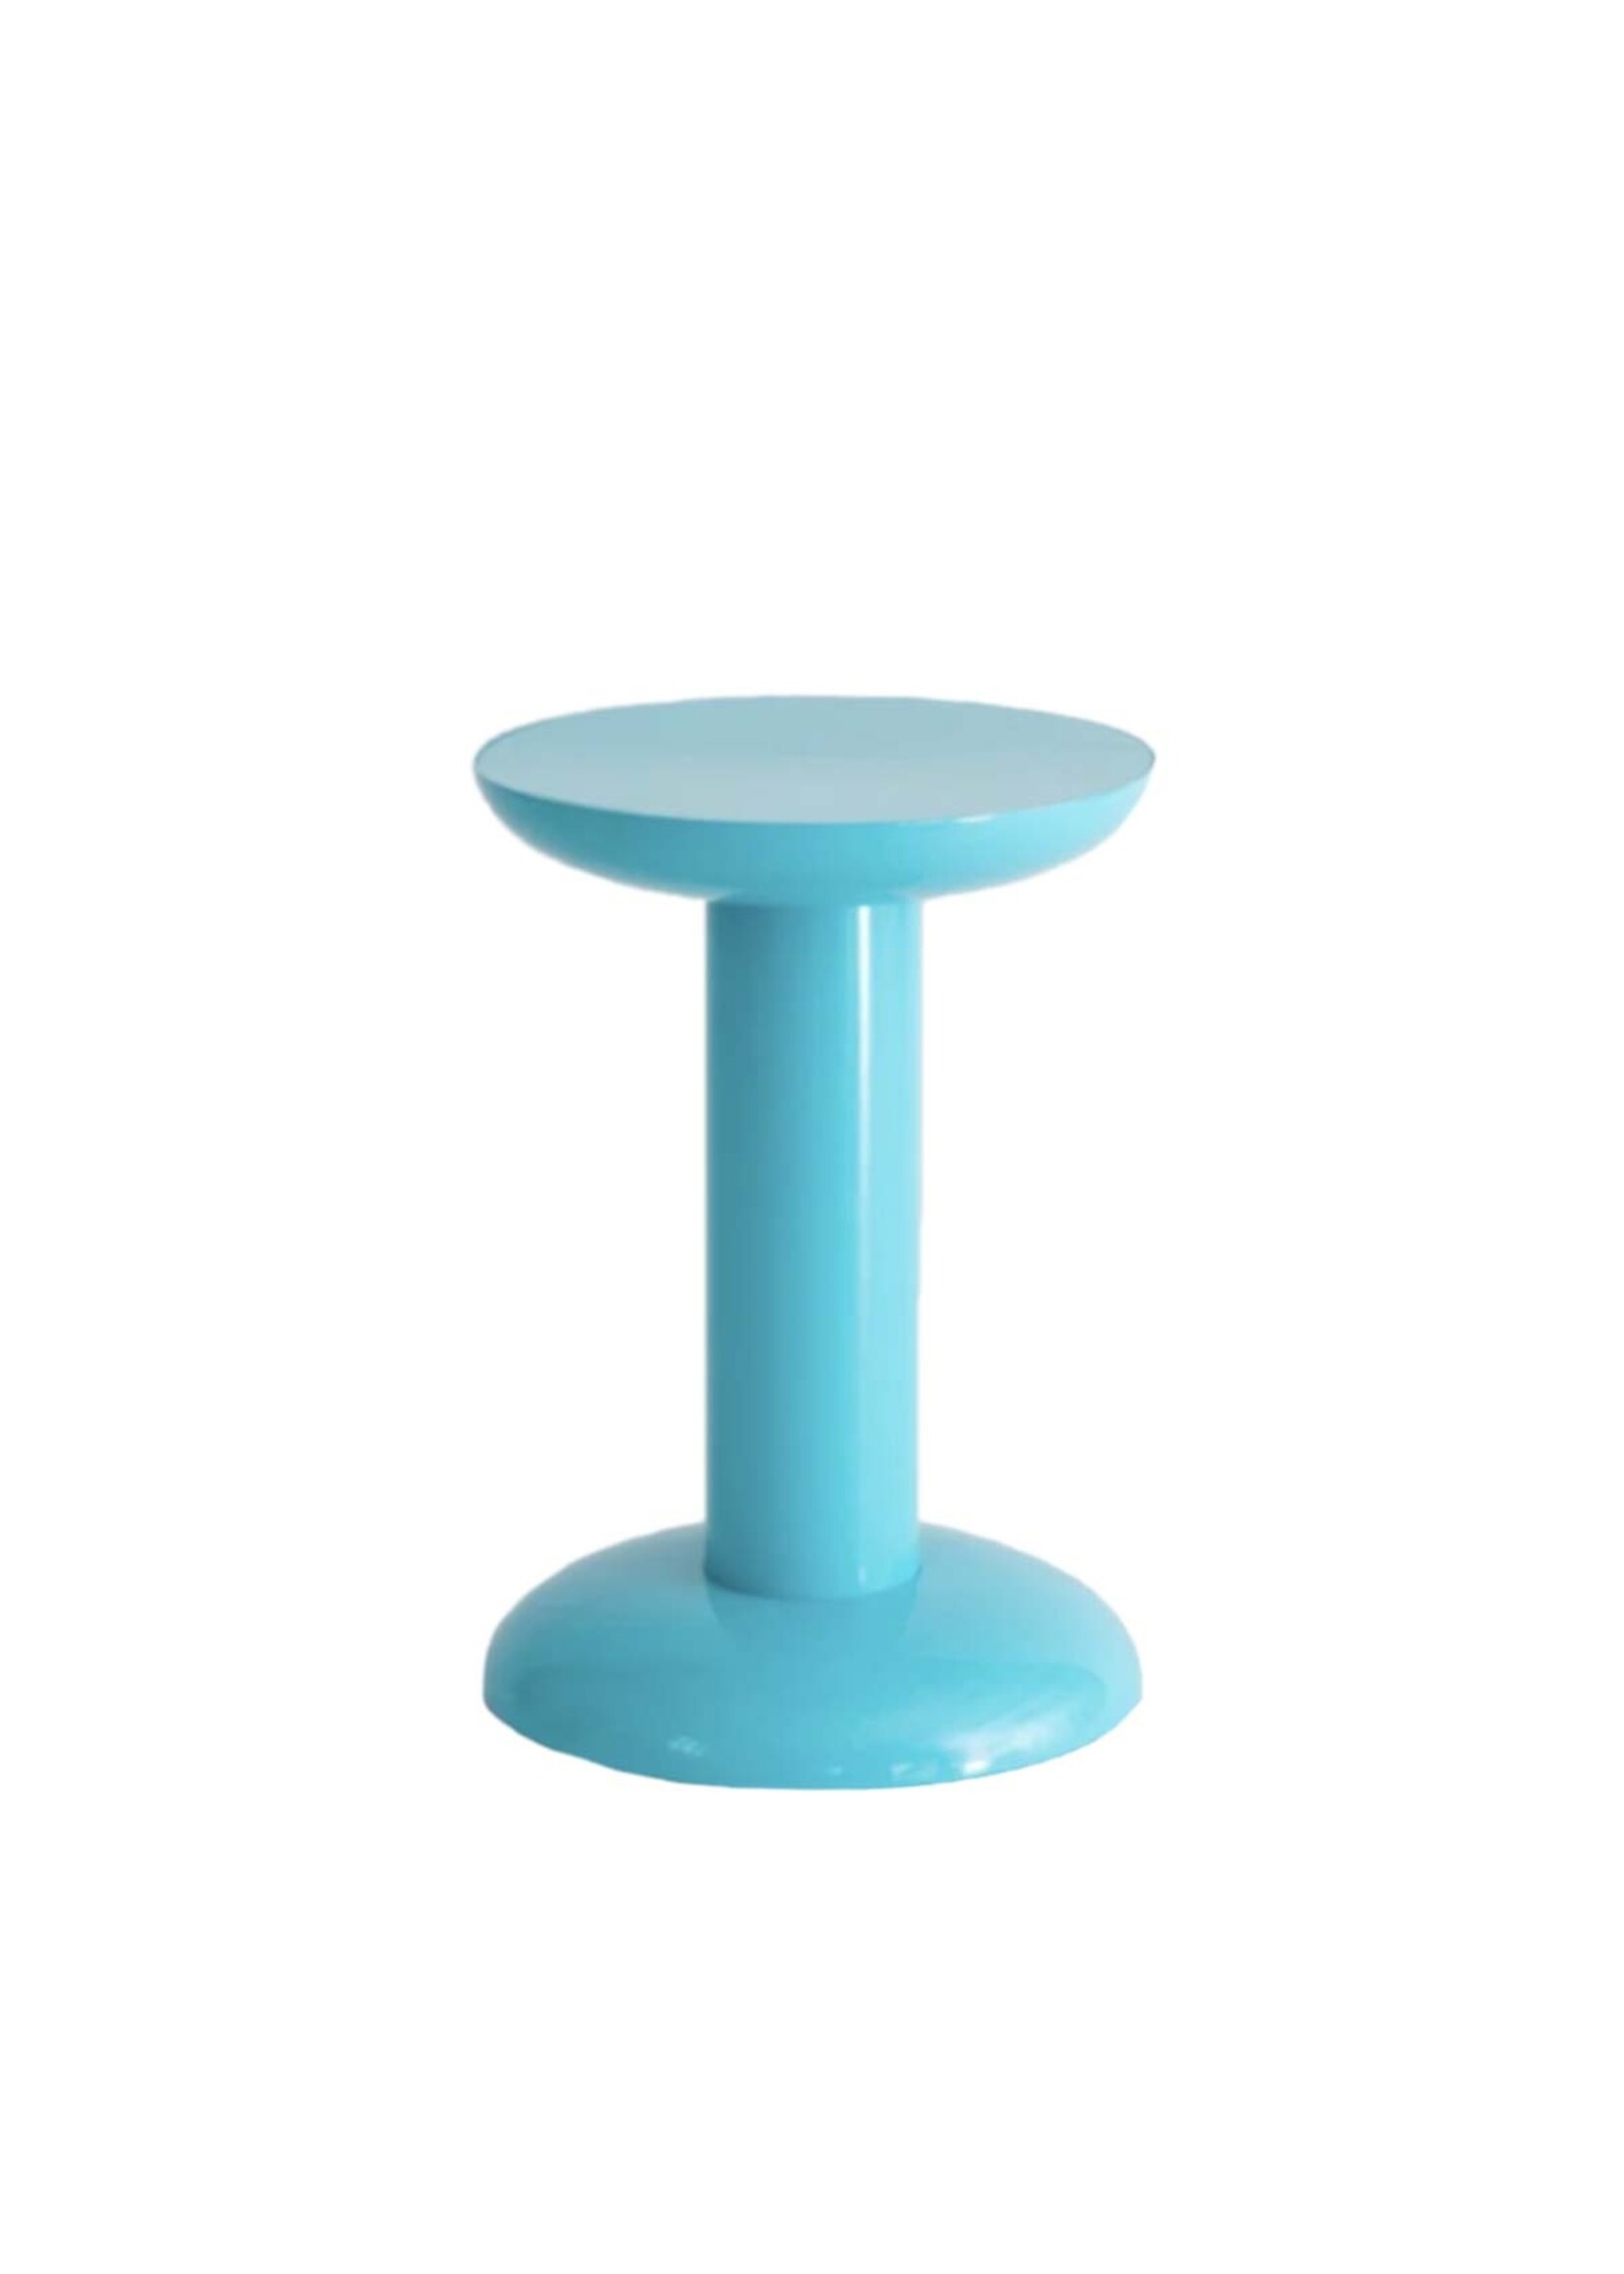 Raawii Thing - Table - Turquoise